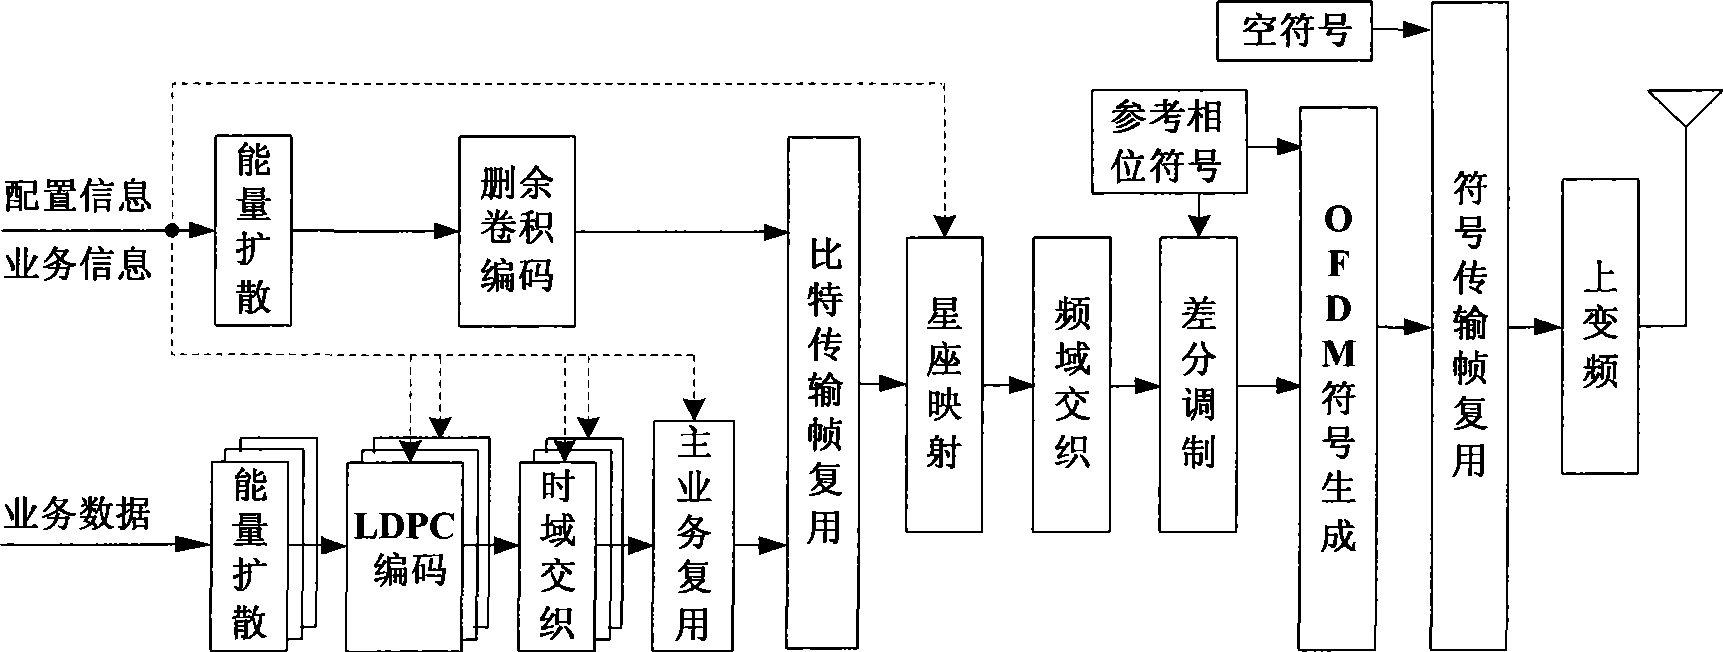 Method for implementing high speed multimedia broadcast technique of CDMA2000 system